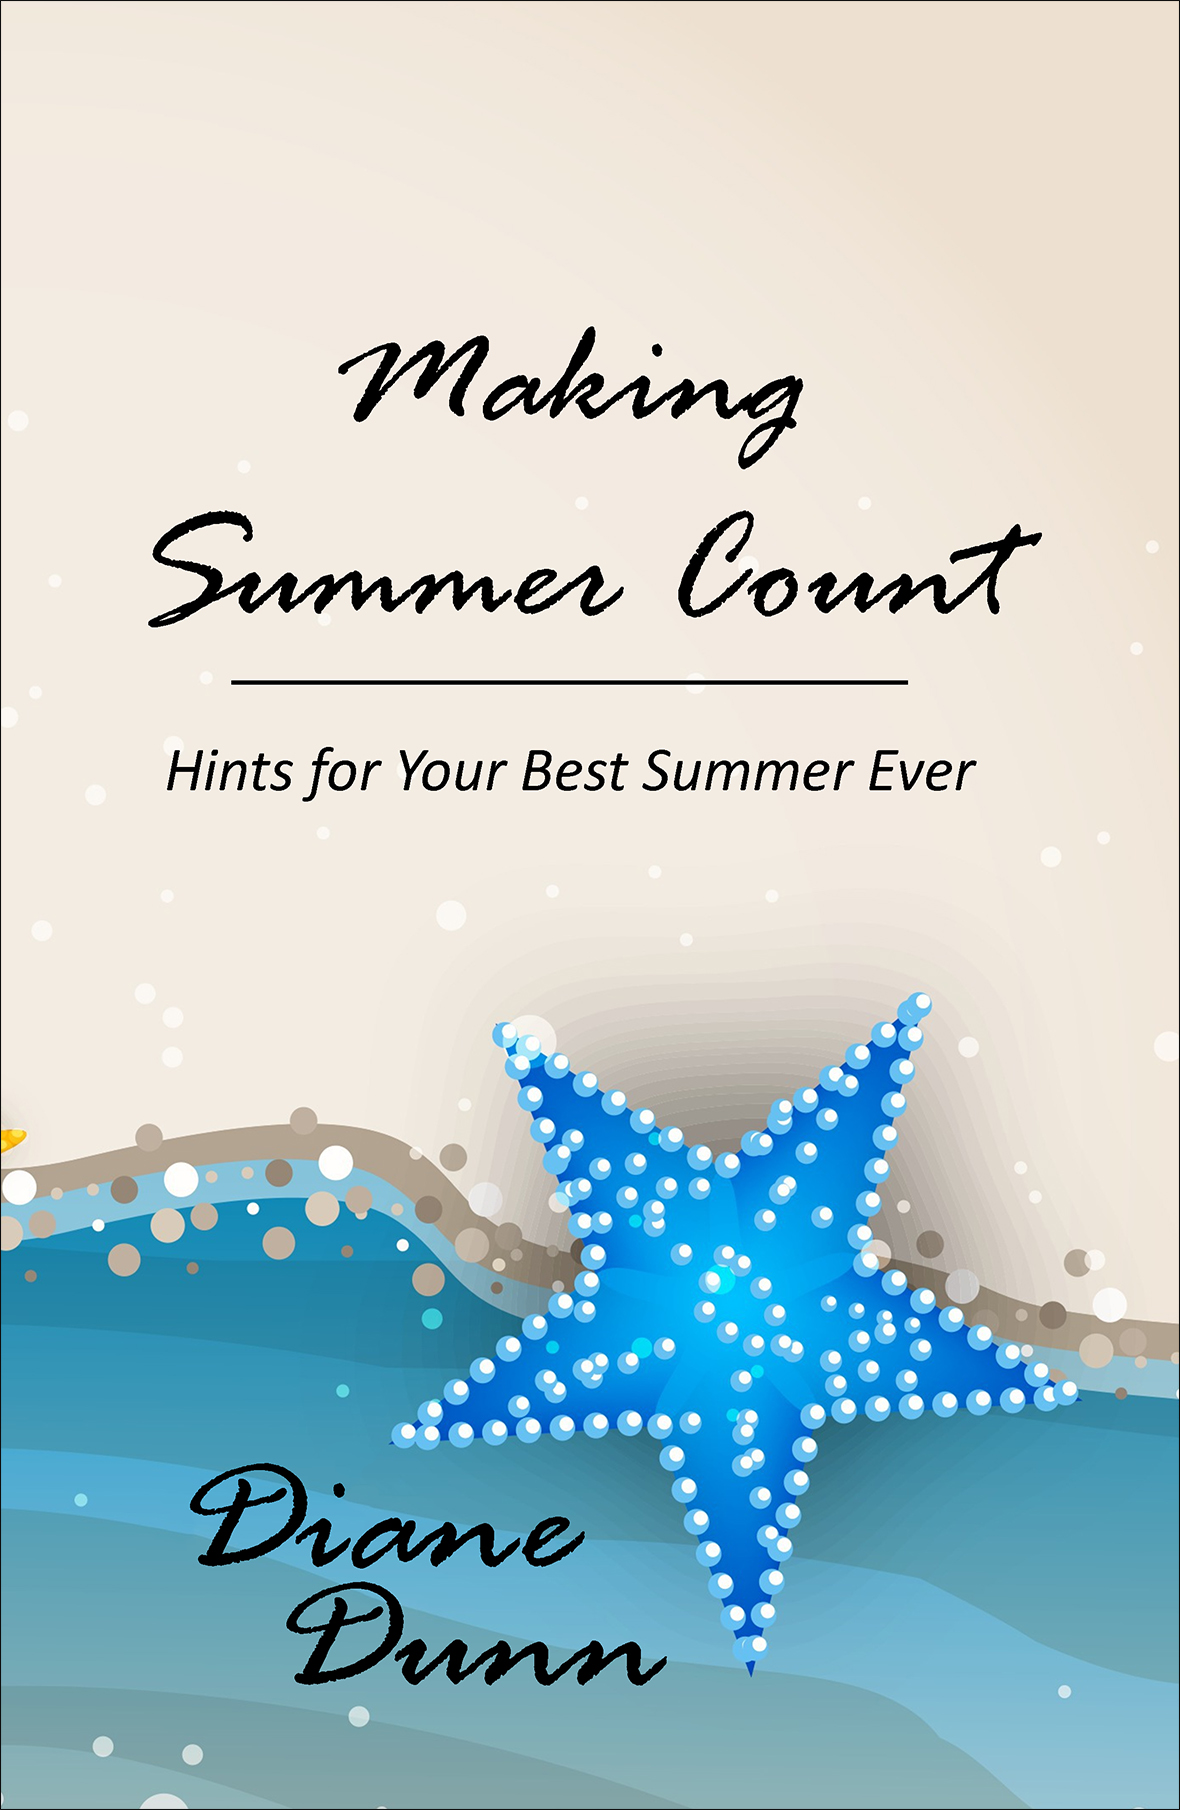 Making Summer Count Hints cover v1 Front Reduced for Web Insertion